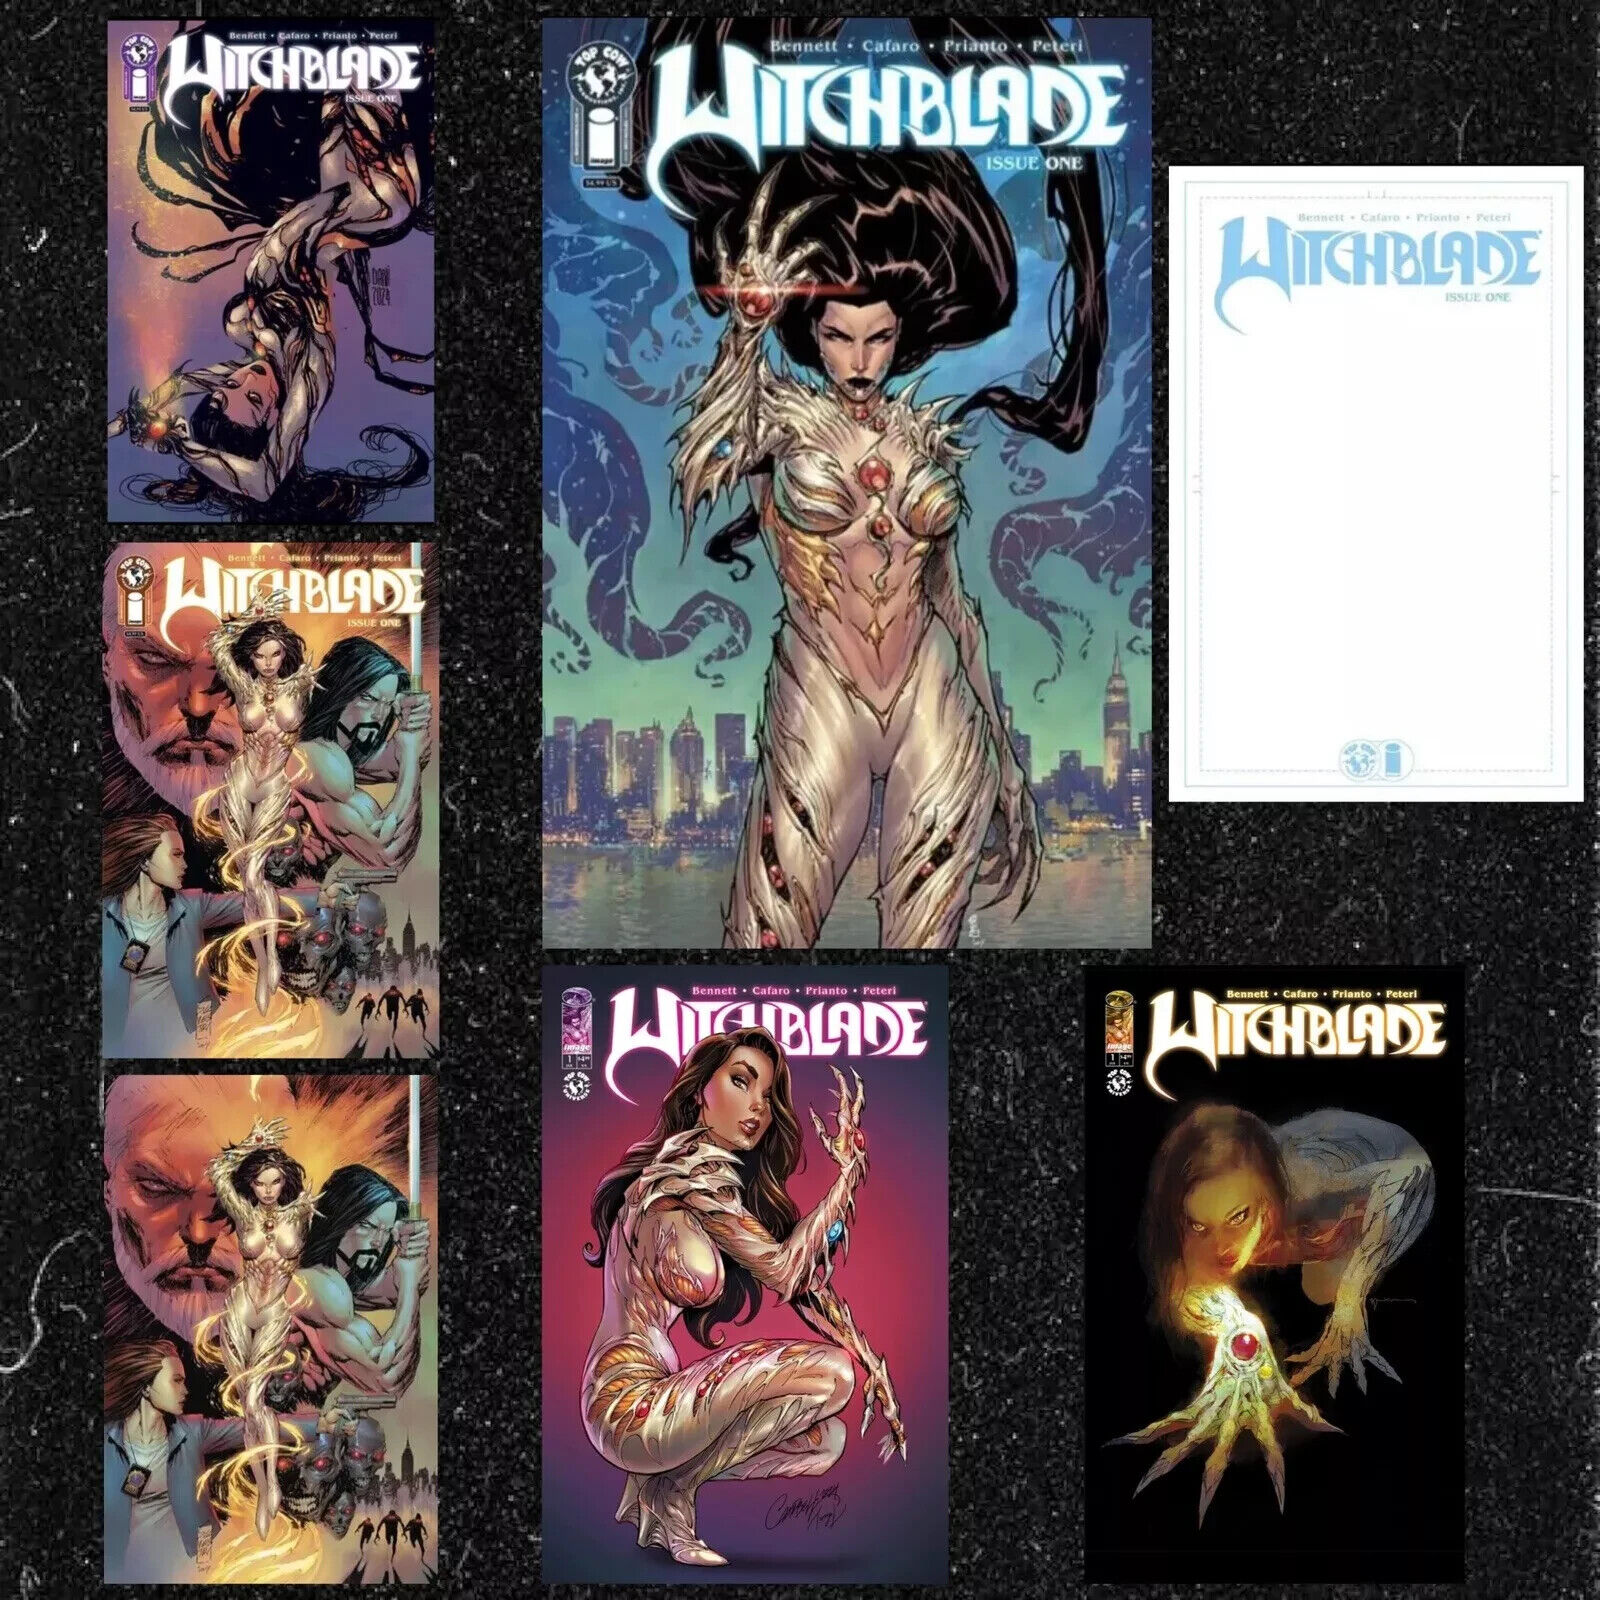 WITCHBLADE 1  1:100 SIENKIEWICZ VARIANT SET OF 7 COVERS 1:50 CAMPBELL PRESALE